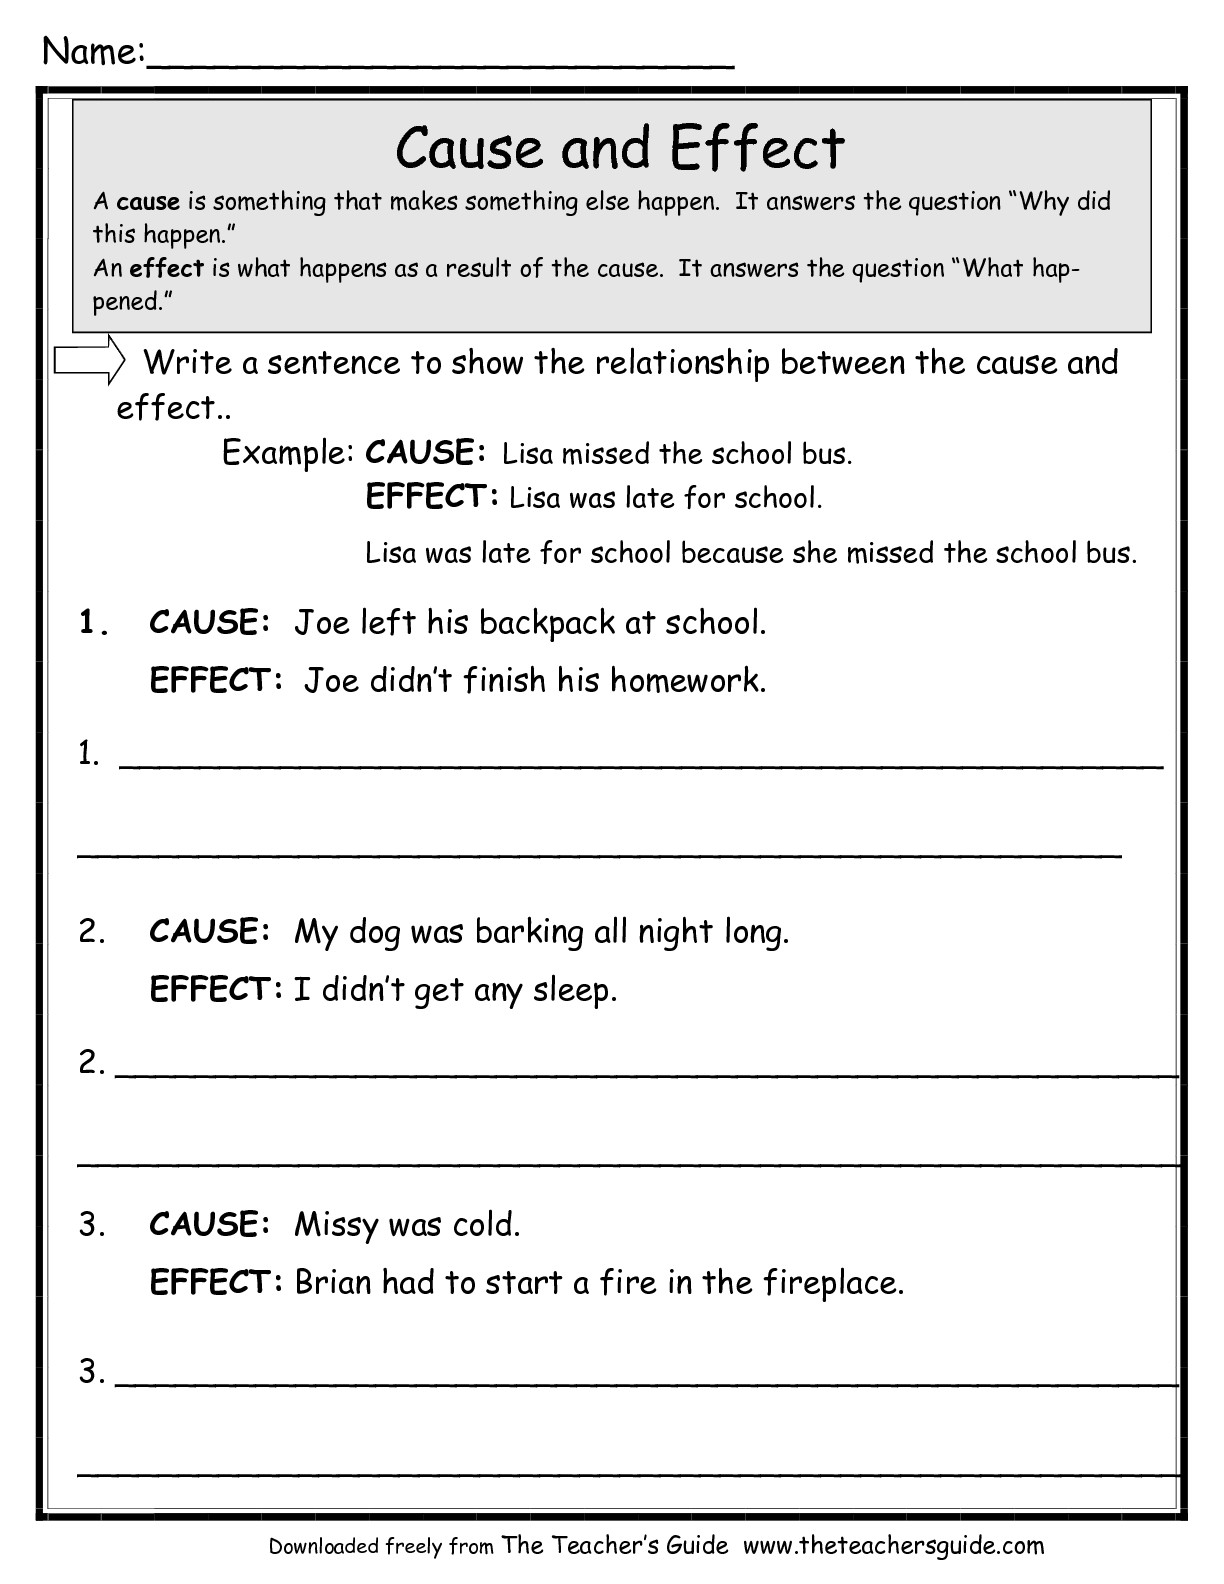 cause-and-effect-for-kids-worksheets-99worksheets